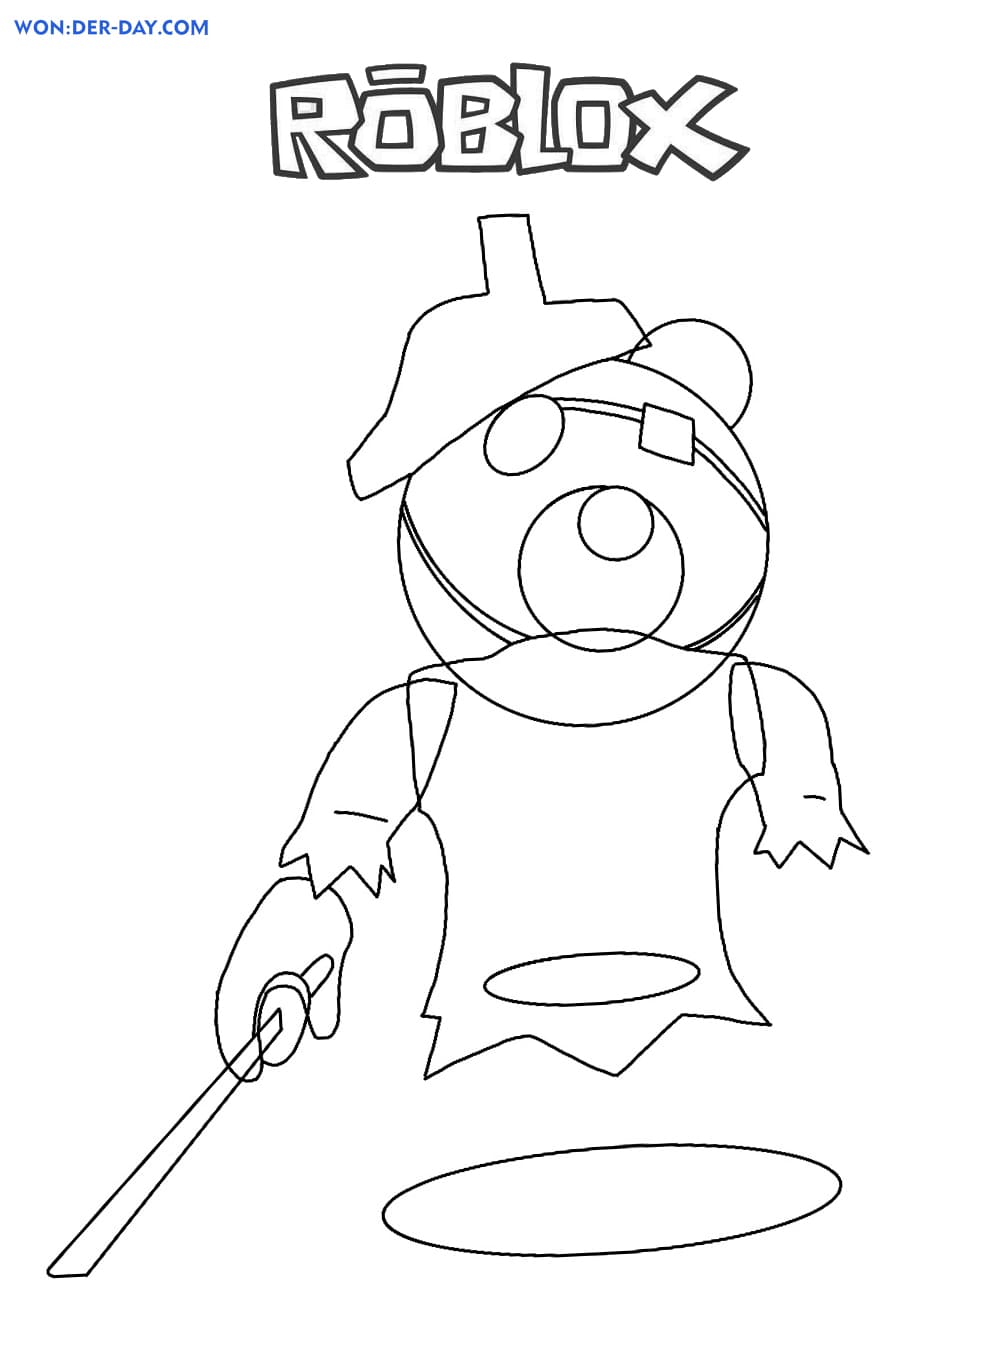 Piggy Roblox Coloring Pages Wonder Day Coloring Pages For Children And Adults - roblox piggy coloring pages printable